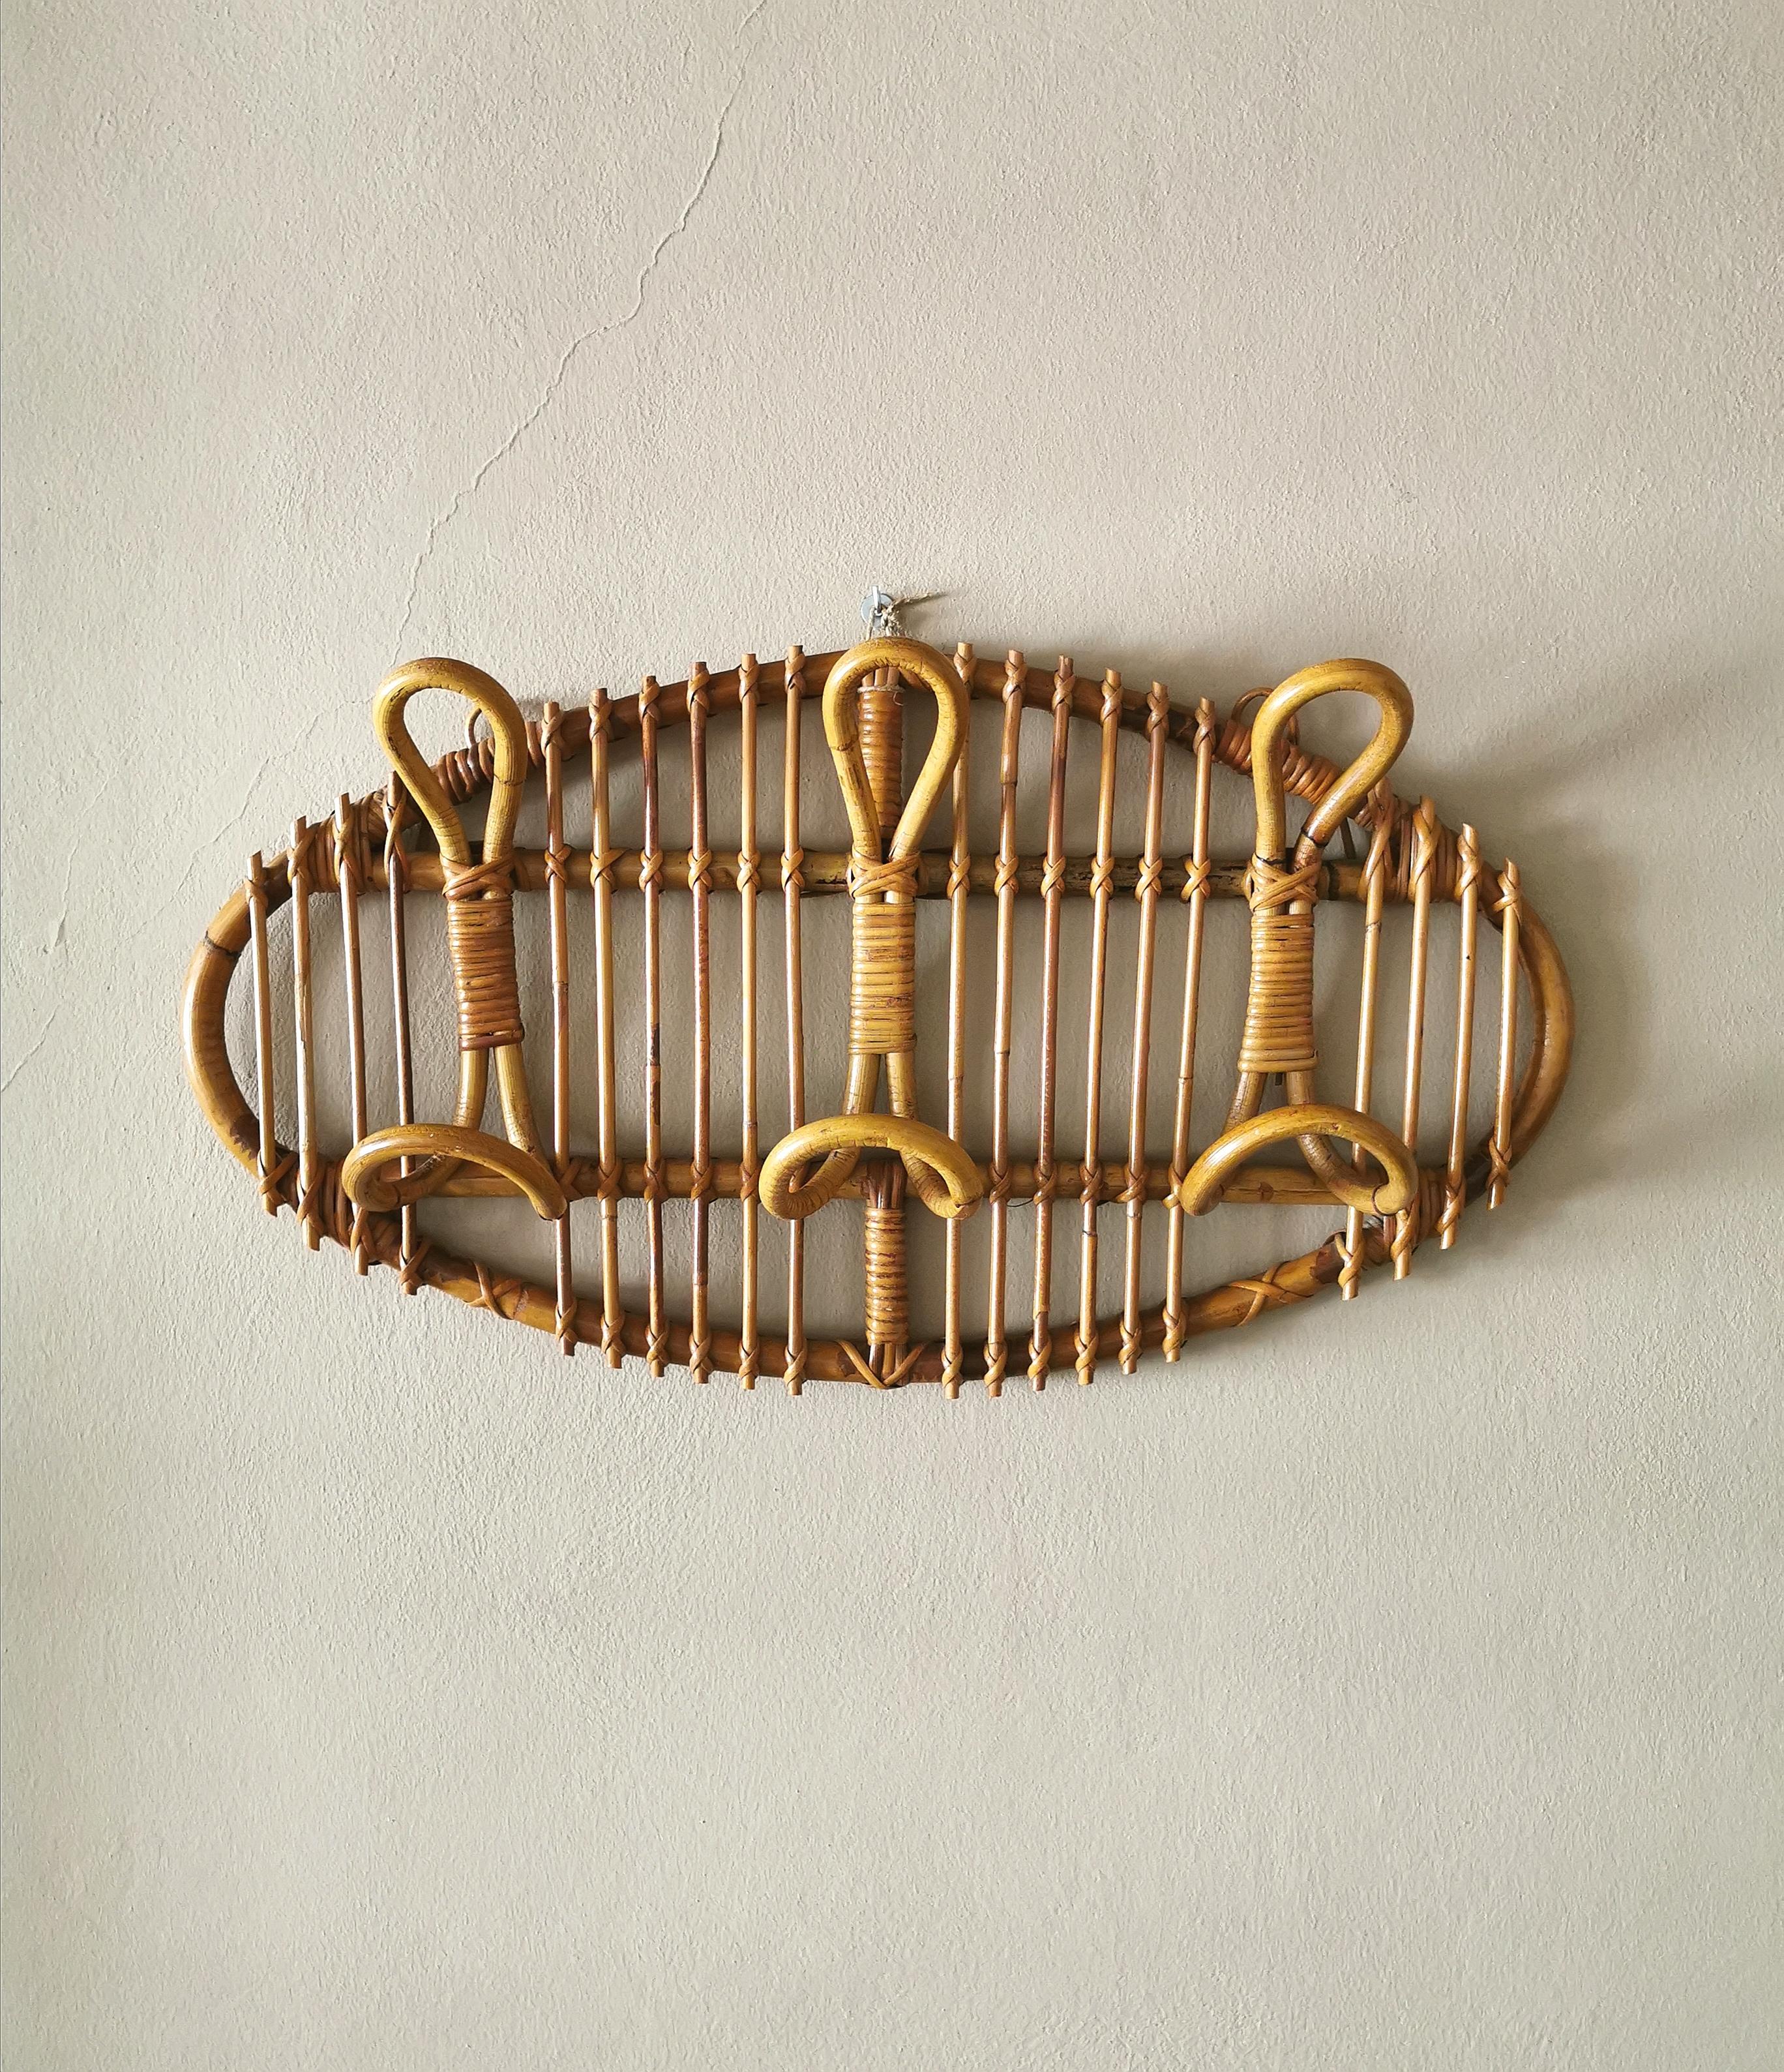 Oval-shaped wall coat rack made of rattan in the style of Franco Albini with 6 hooks for your clothes. Made in Italy in the 1960s.